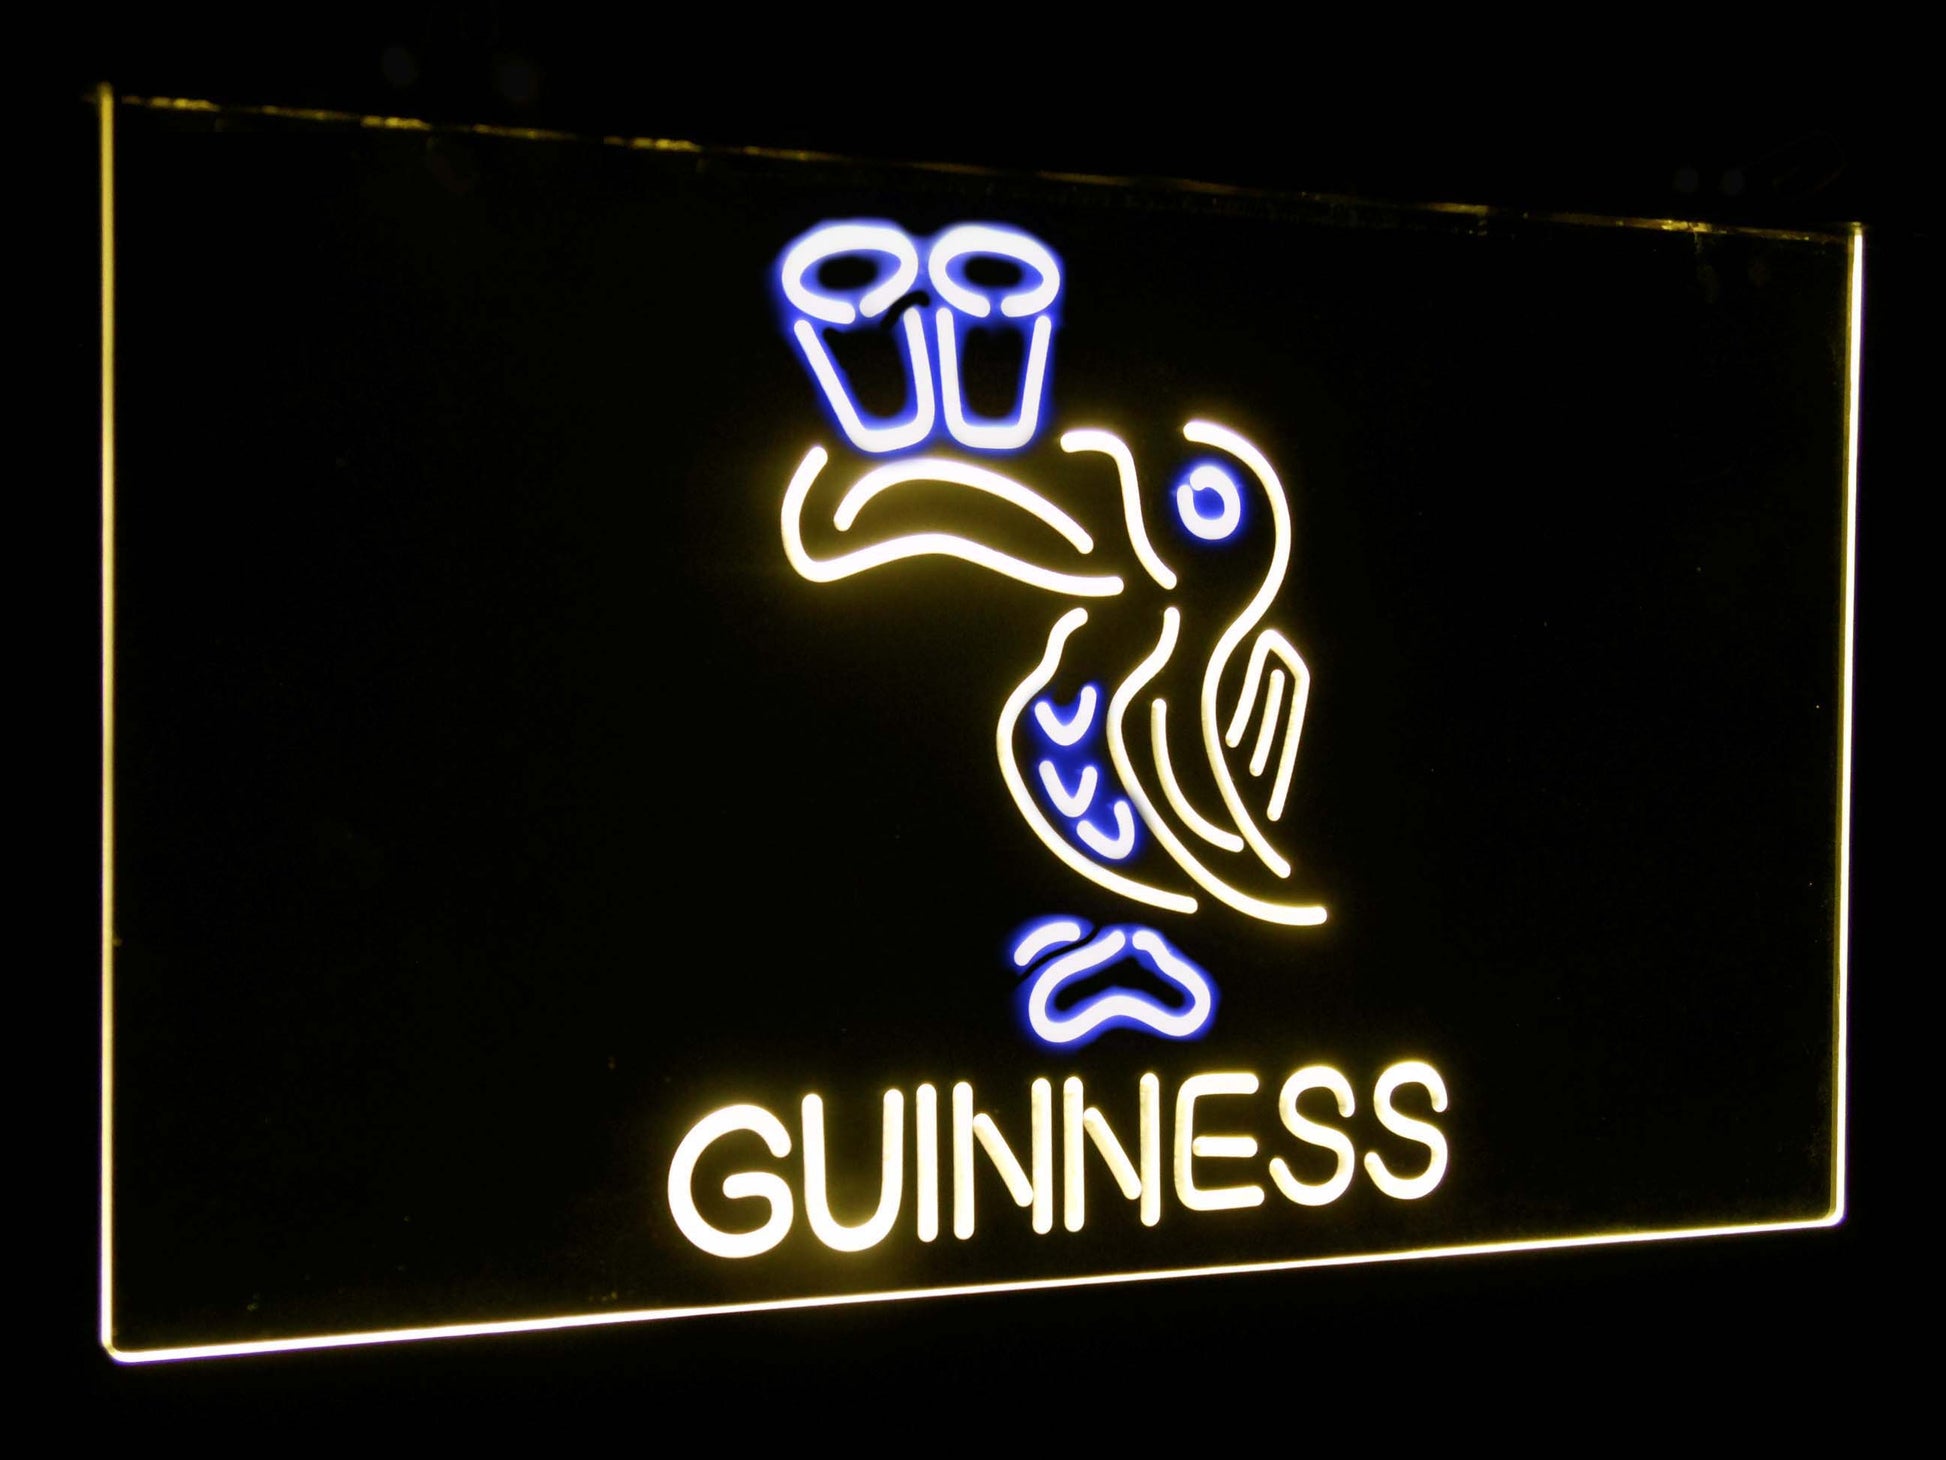 Lovely Day Guinness  Toucan Bar Decor Dual Color Led Neon Light Signs st6-a2121 by Woody Signs Co. - Handmade Crafted Unique Wooden Creative